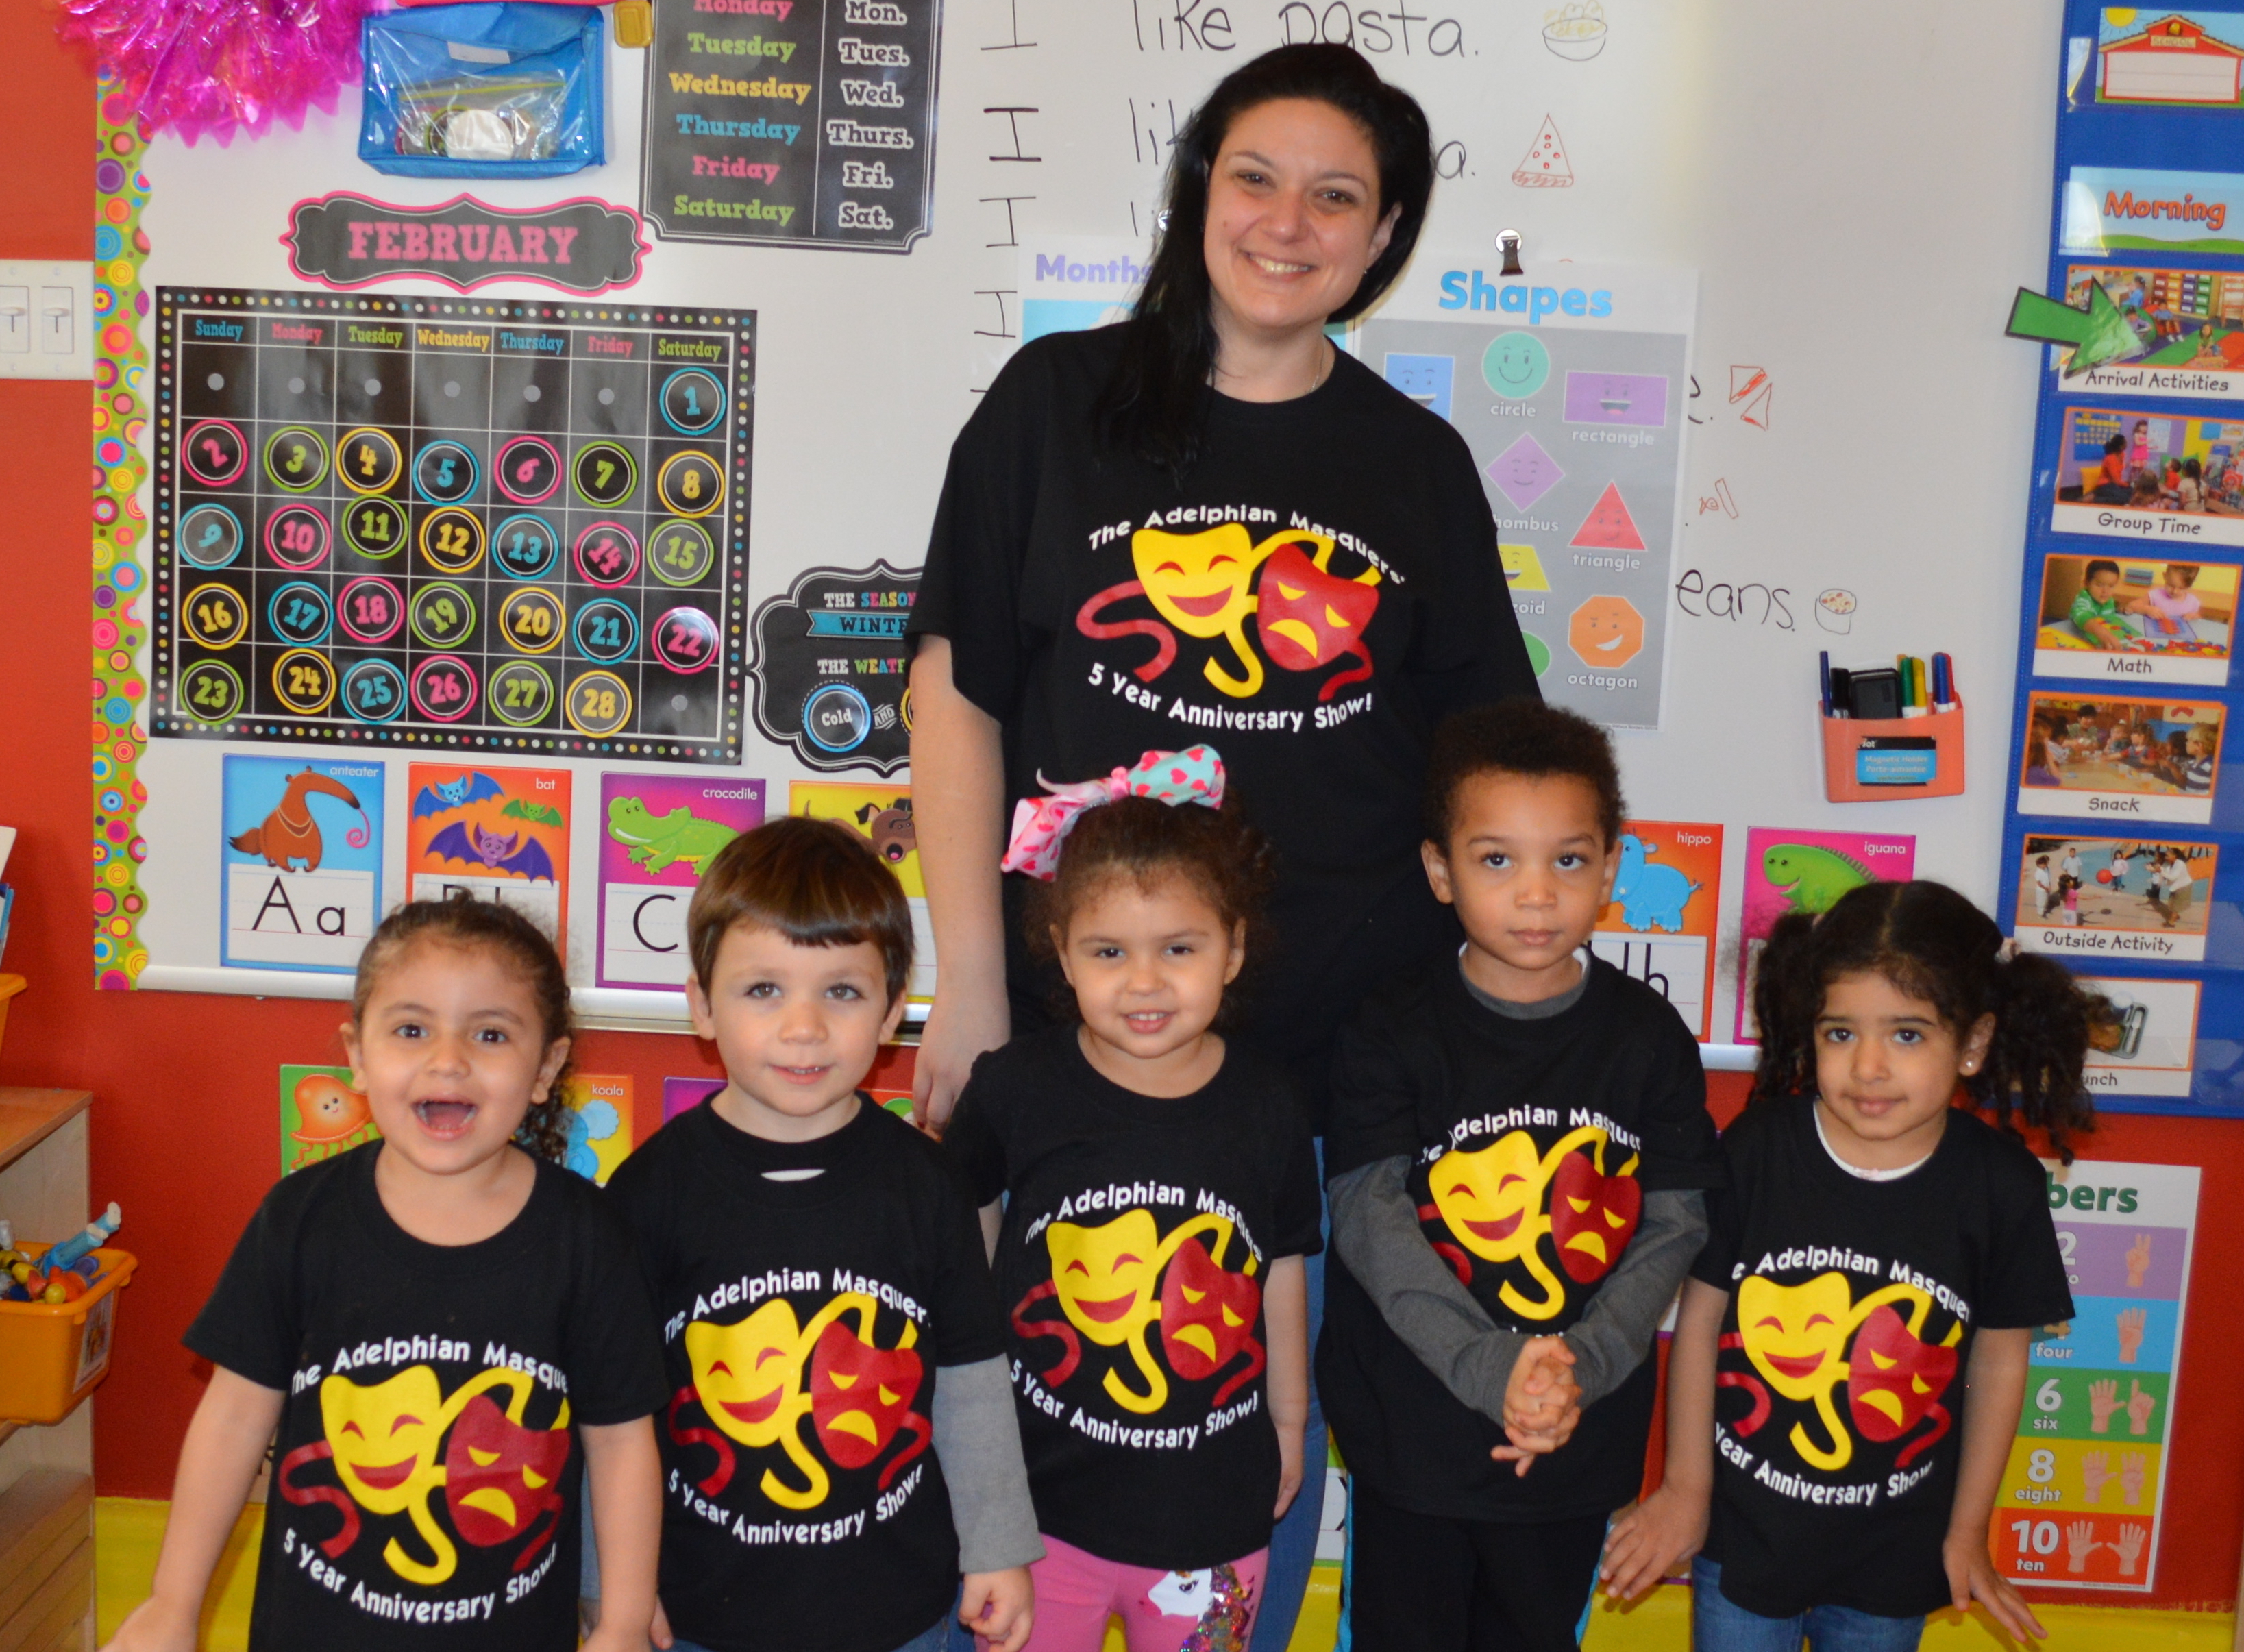 Lower Schoolers showed their support for "The Adelphian Masquers' 5 Year Anniversary Show!"